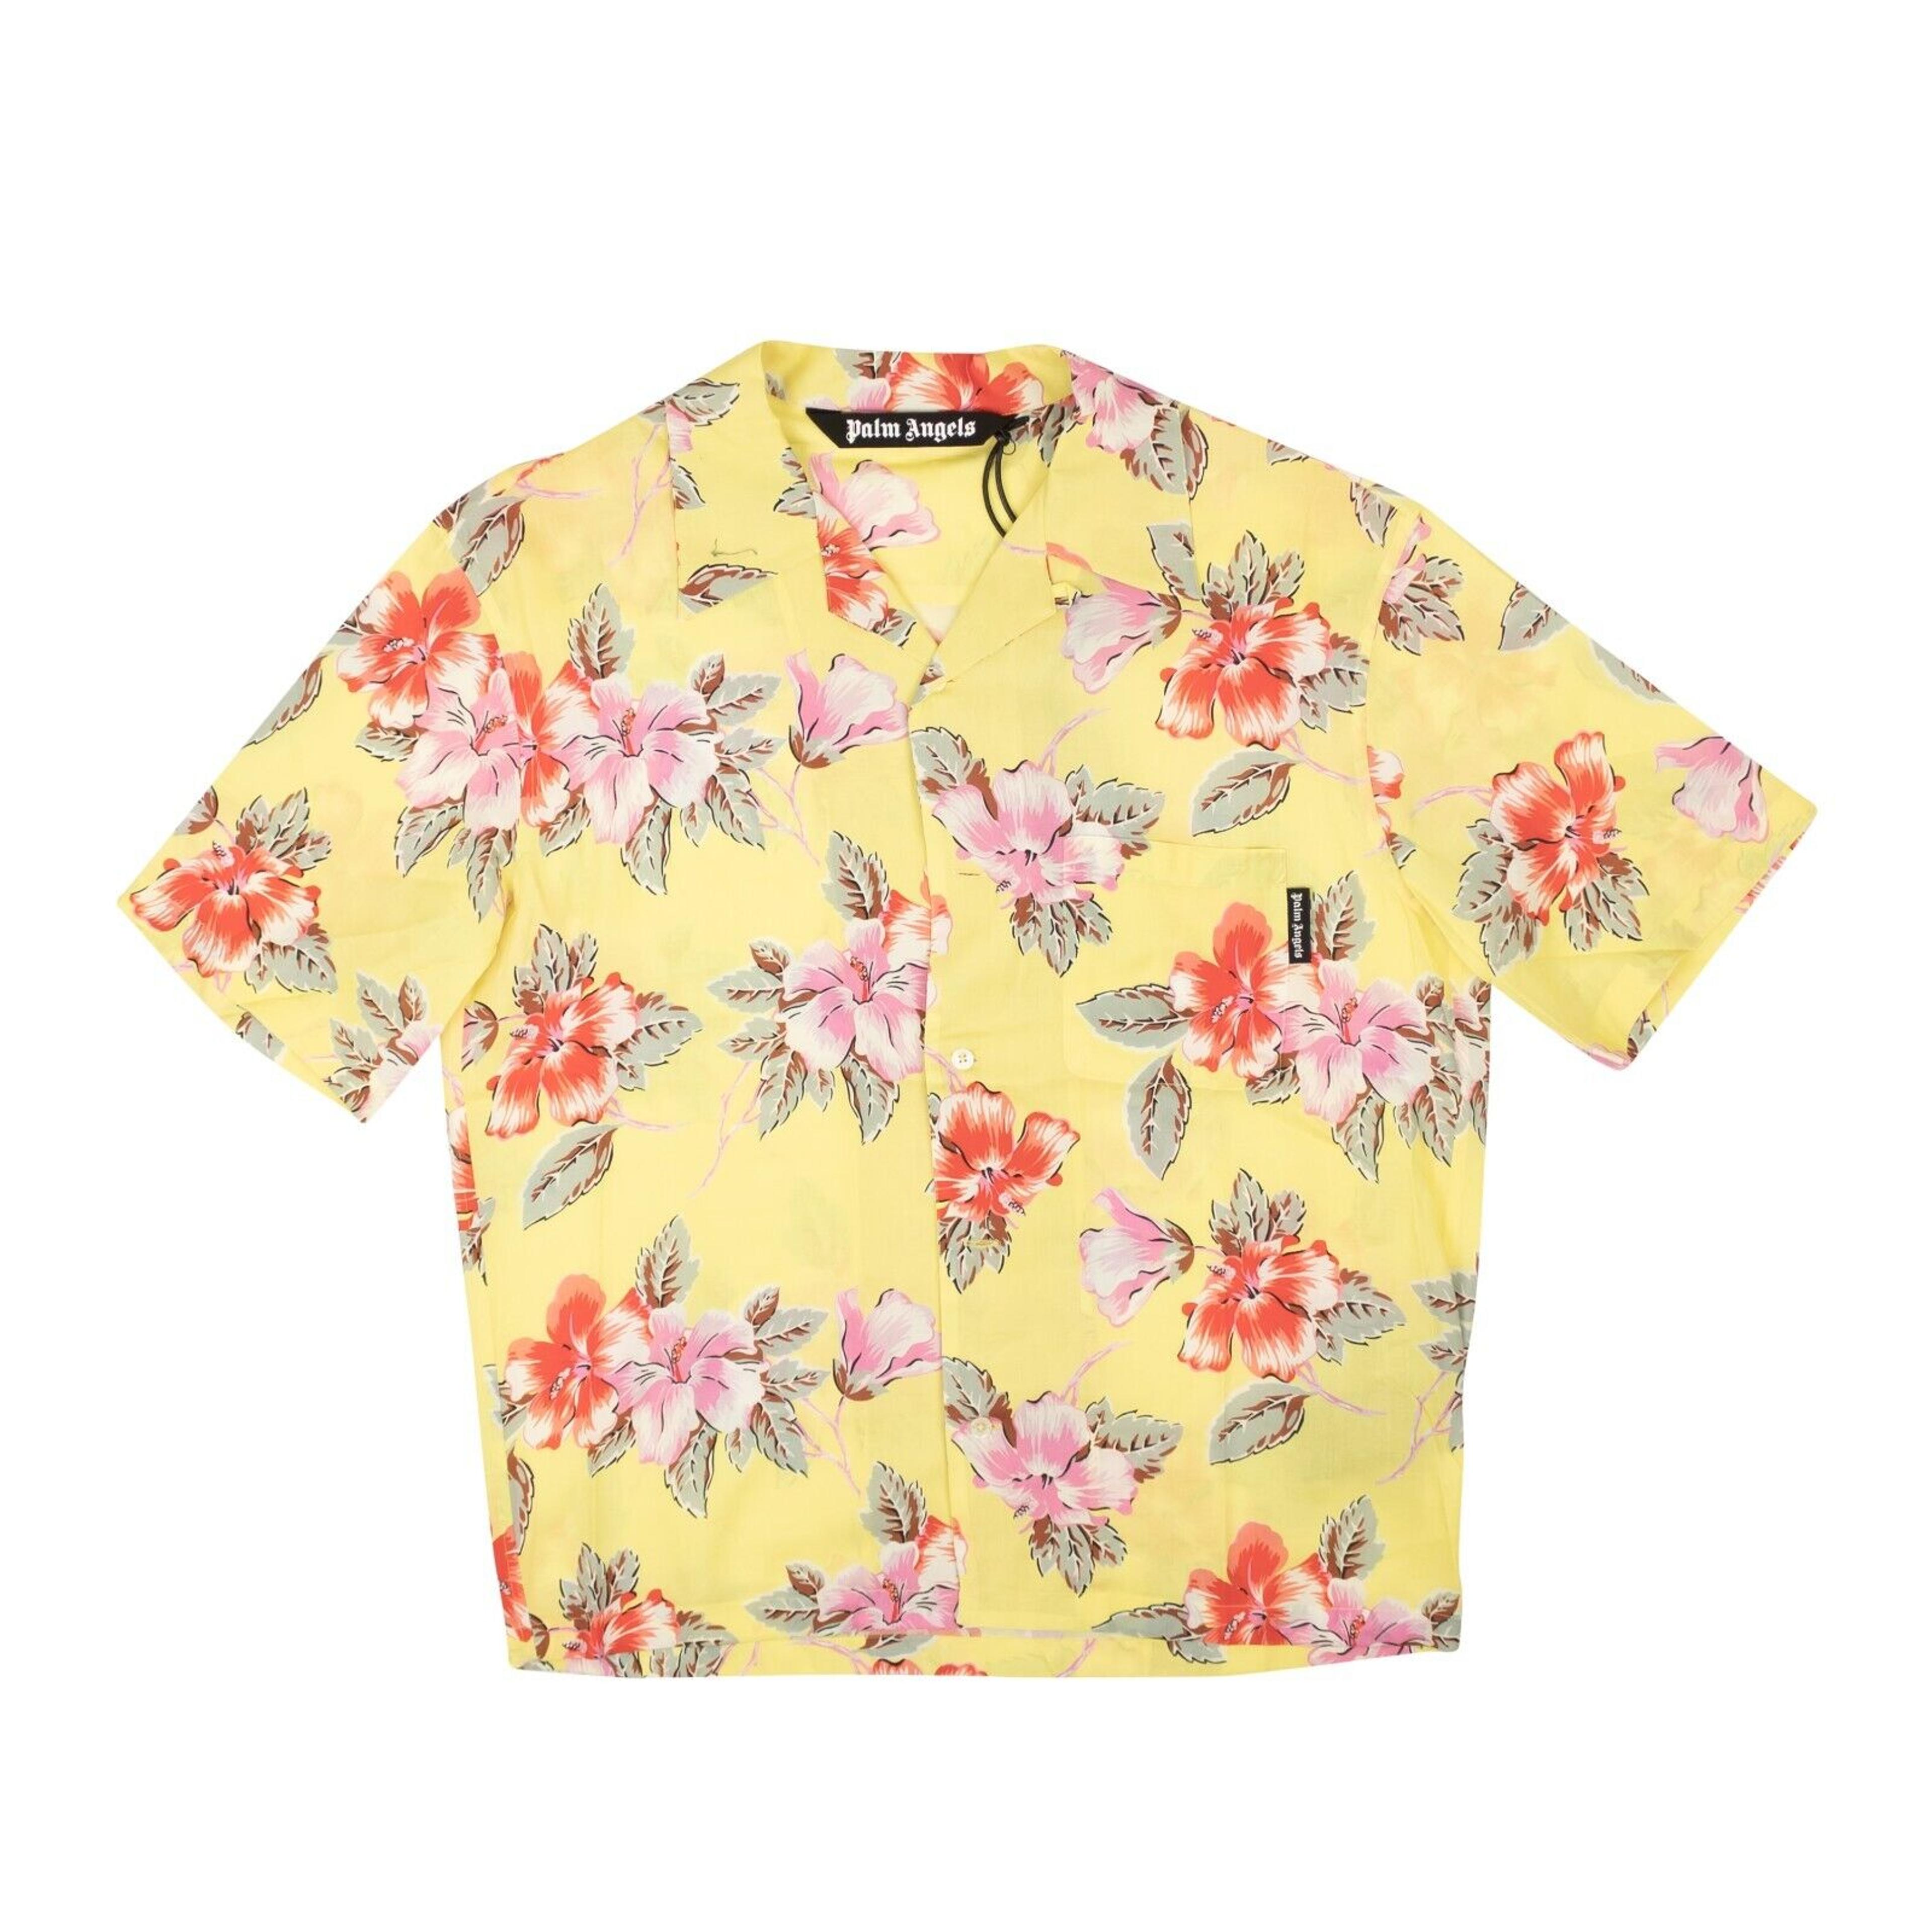 Alternate View 1 of Yellow Hibiscus Print Button Down Bowling Shirt